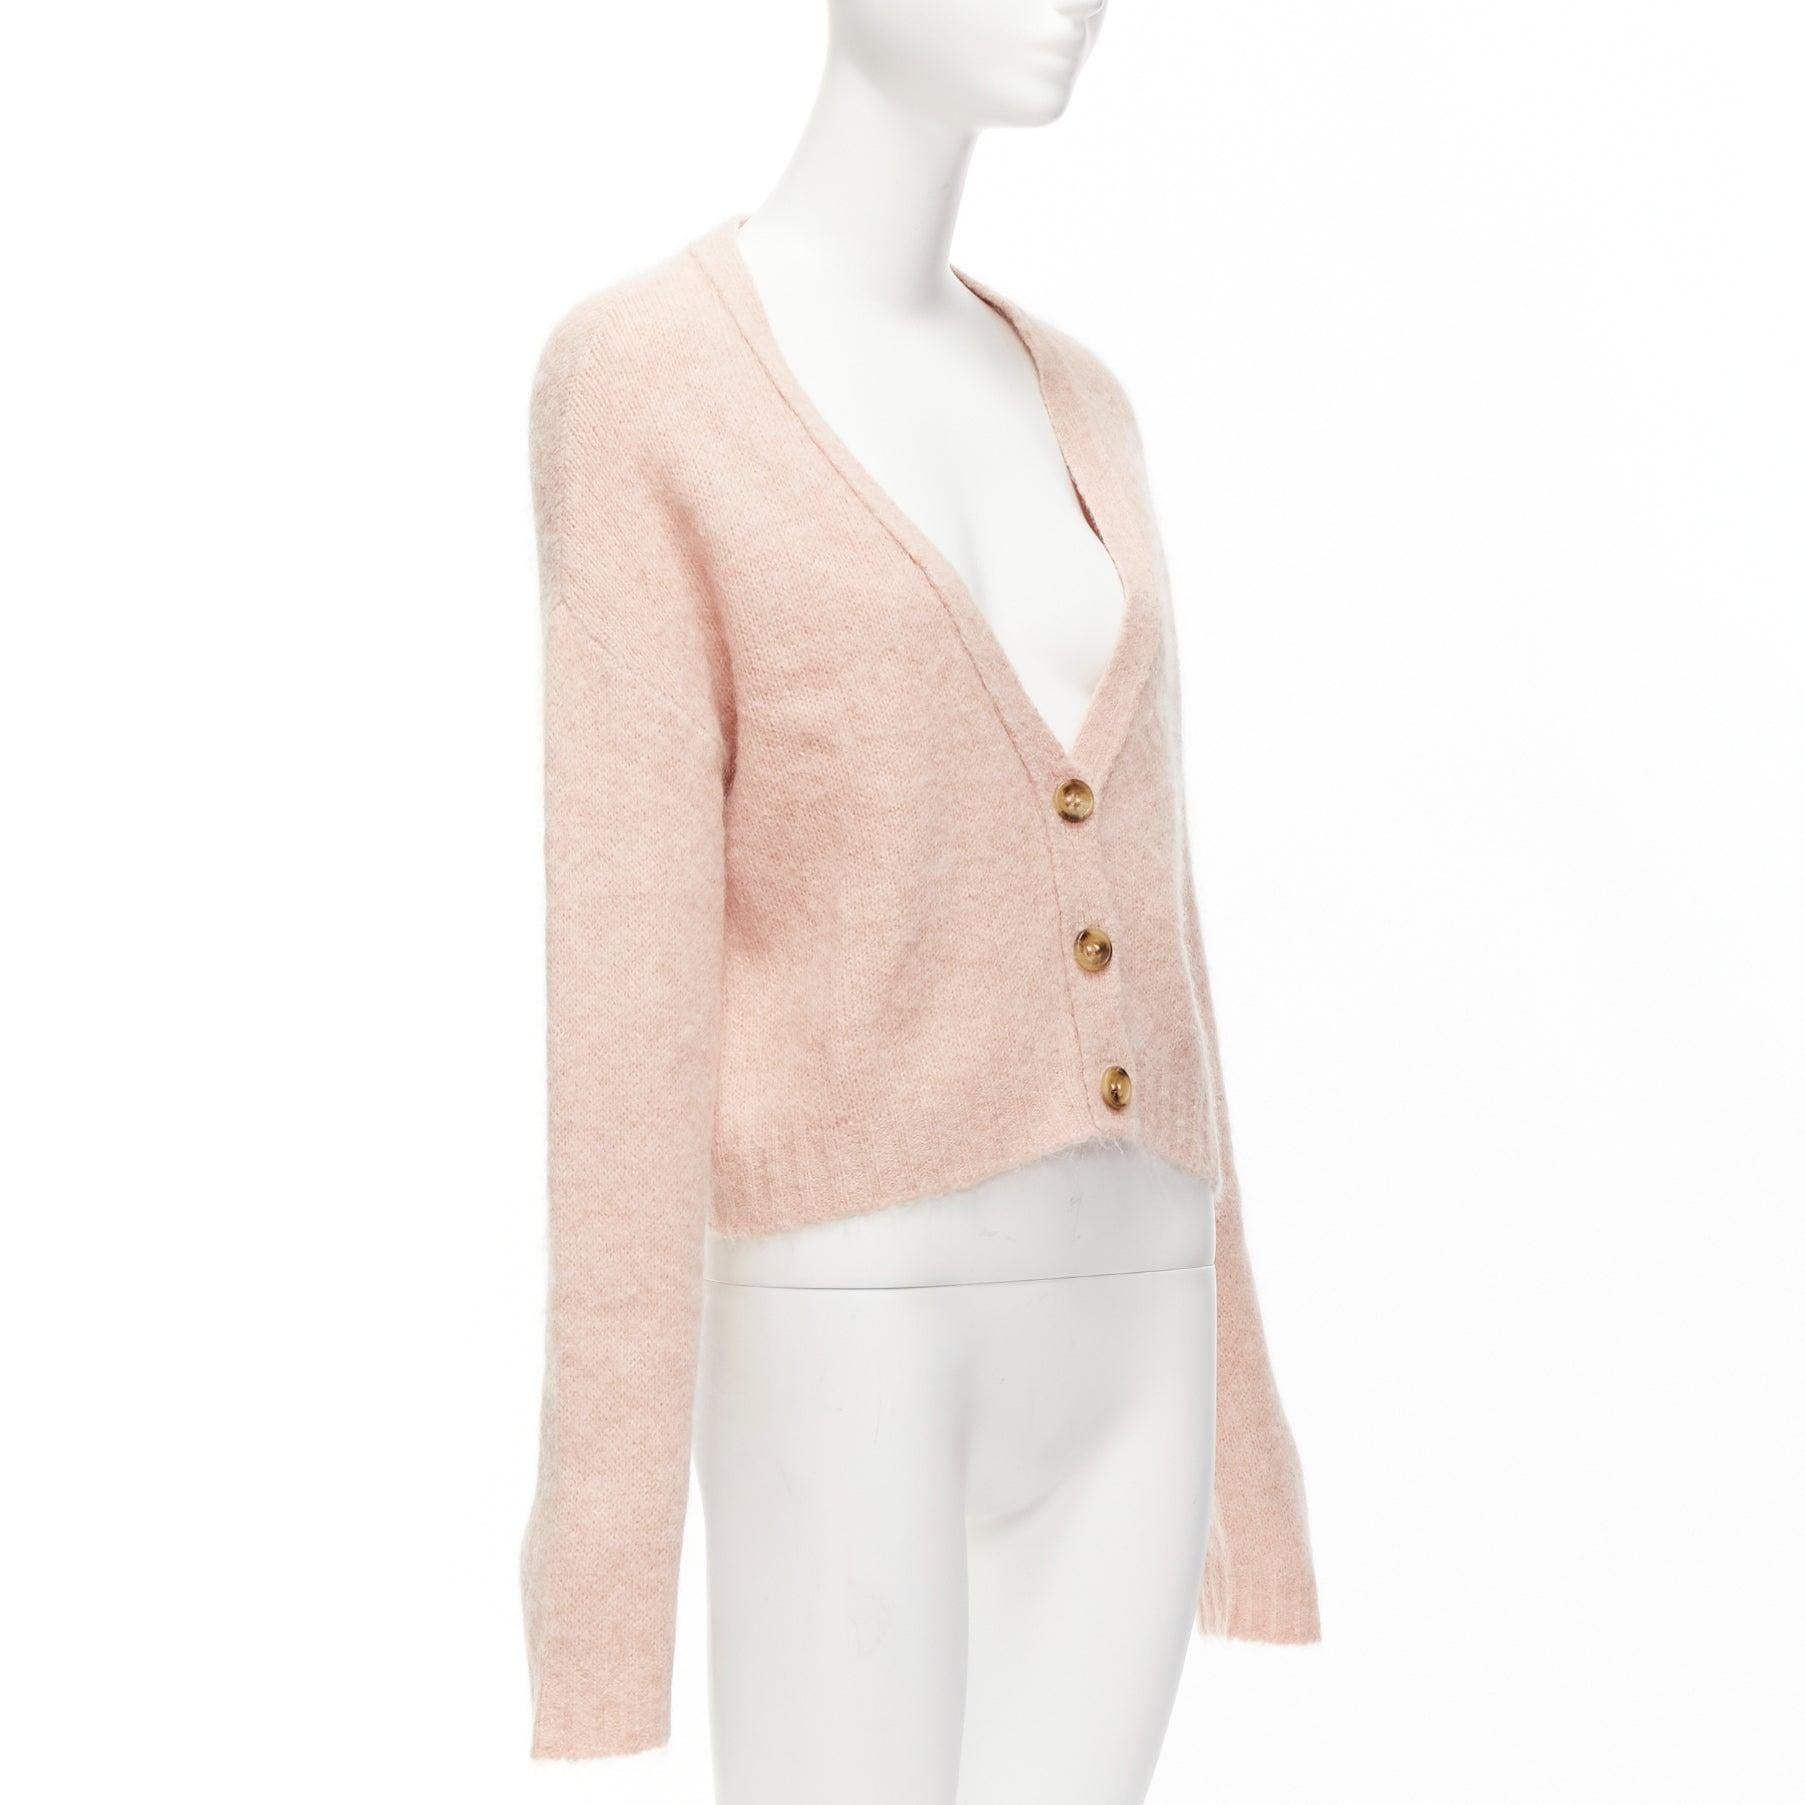 RED VALENTINO pink alpaca blend horn button cardigan sweater XS For Sale 1